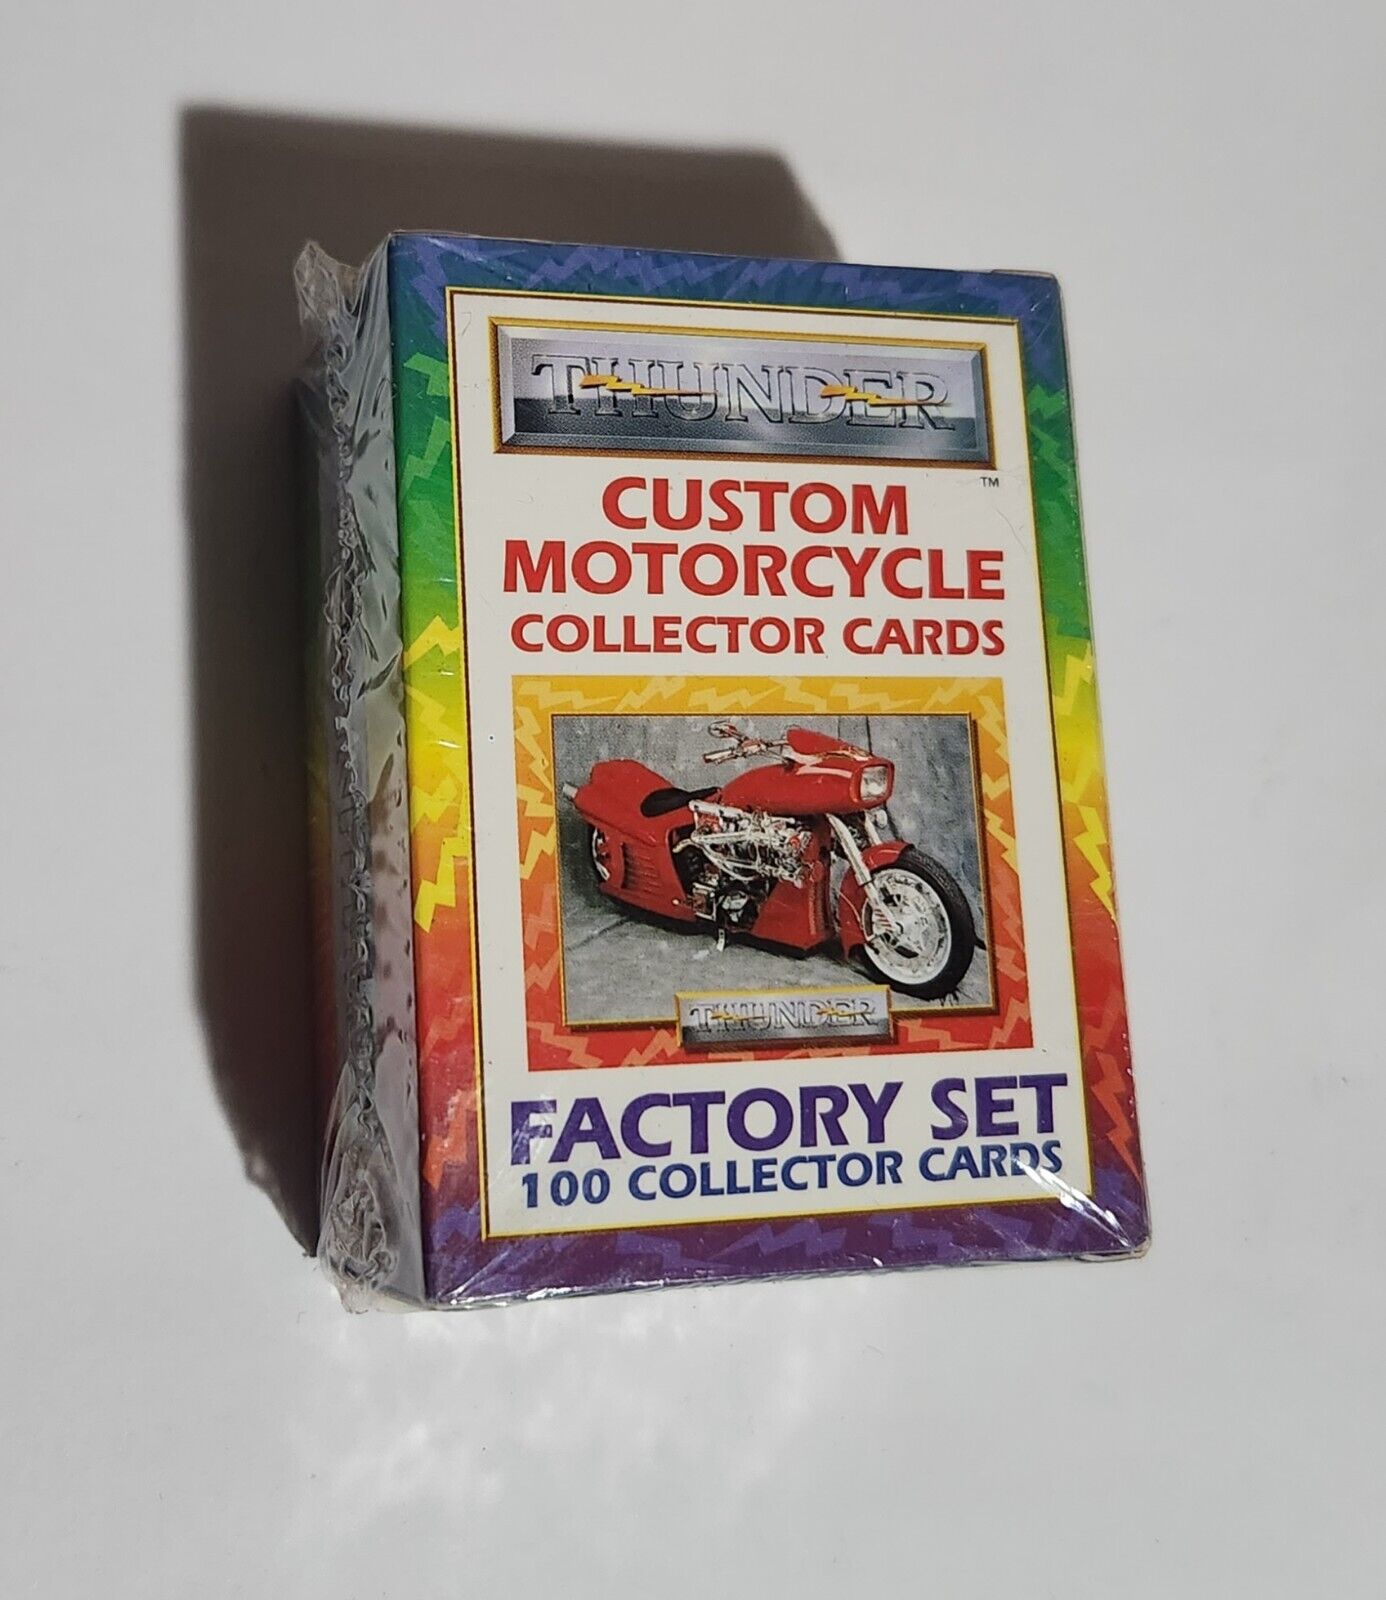 THUNDER CUSTOM MOTORCYCLE COLLECTOR CARDS 1993 FACTORY BASE CARD SET